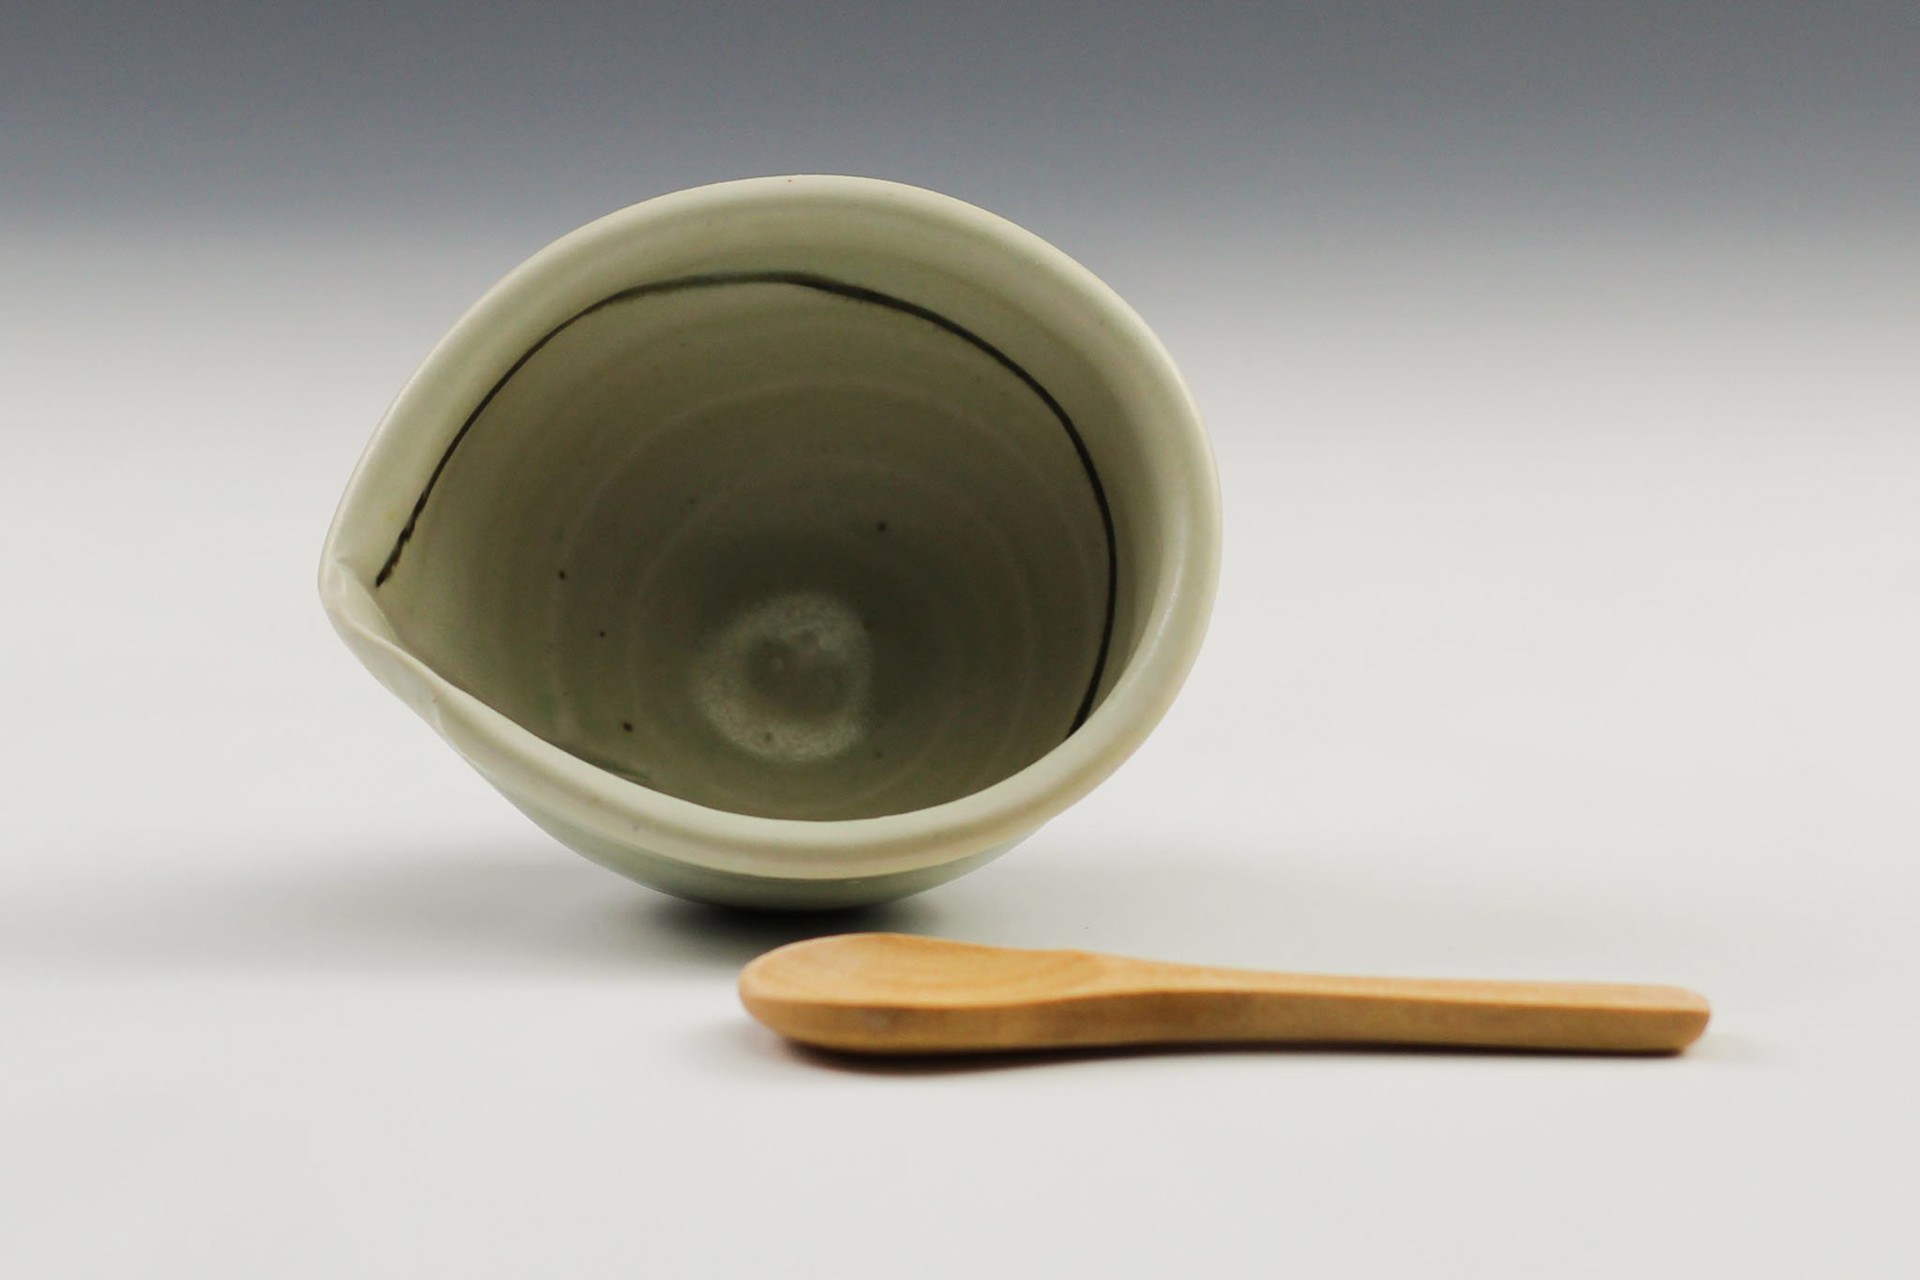 Small Condiment Bowl with Spoon by Delores Fortuna